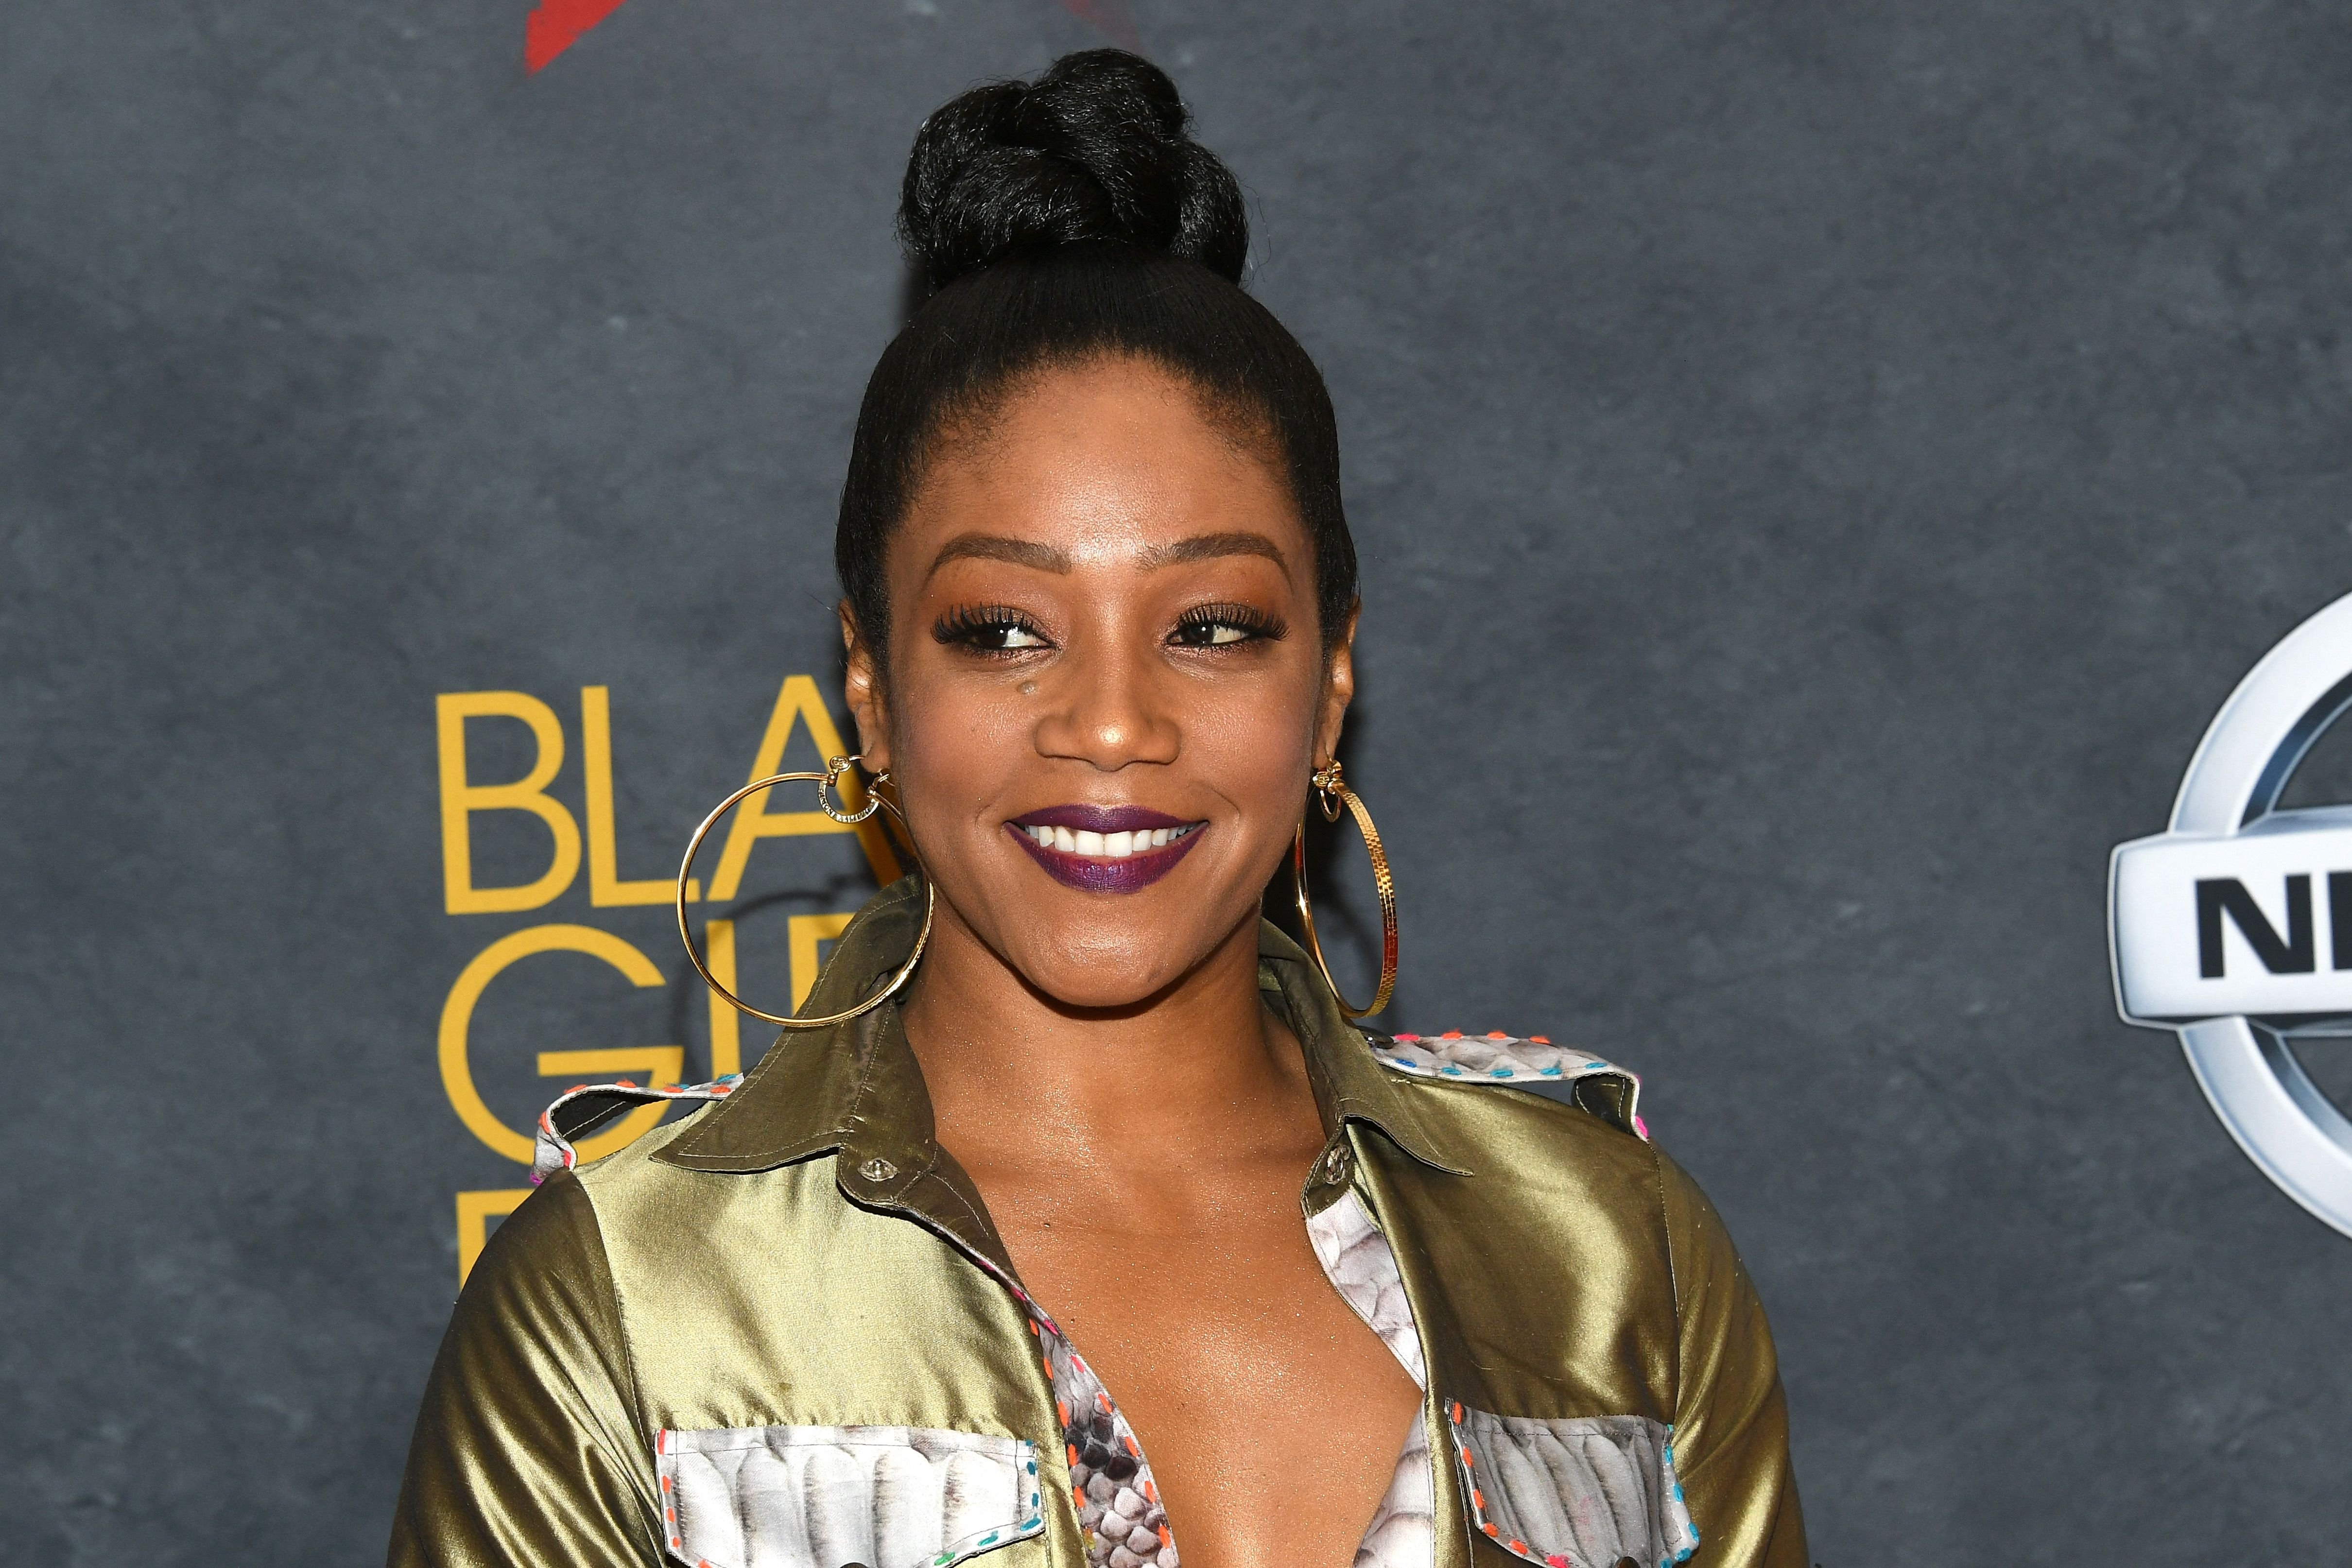 Tiffany Haddish at Black Girls Rock! 2017 in 2017 in Newark, New Jersey | Source: Getty Images